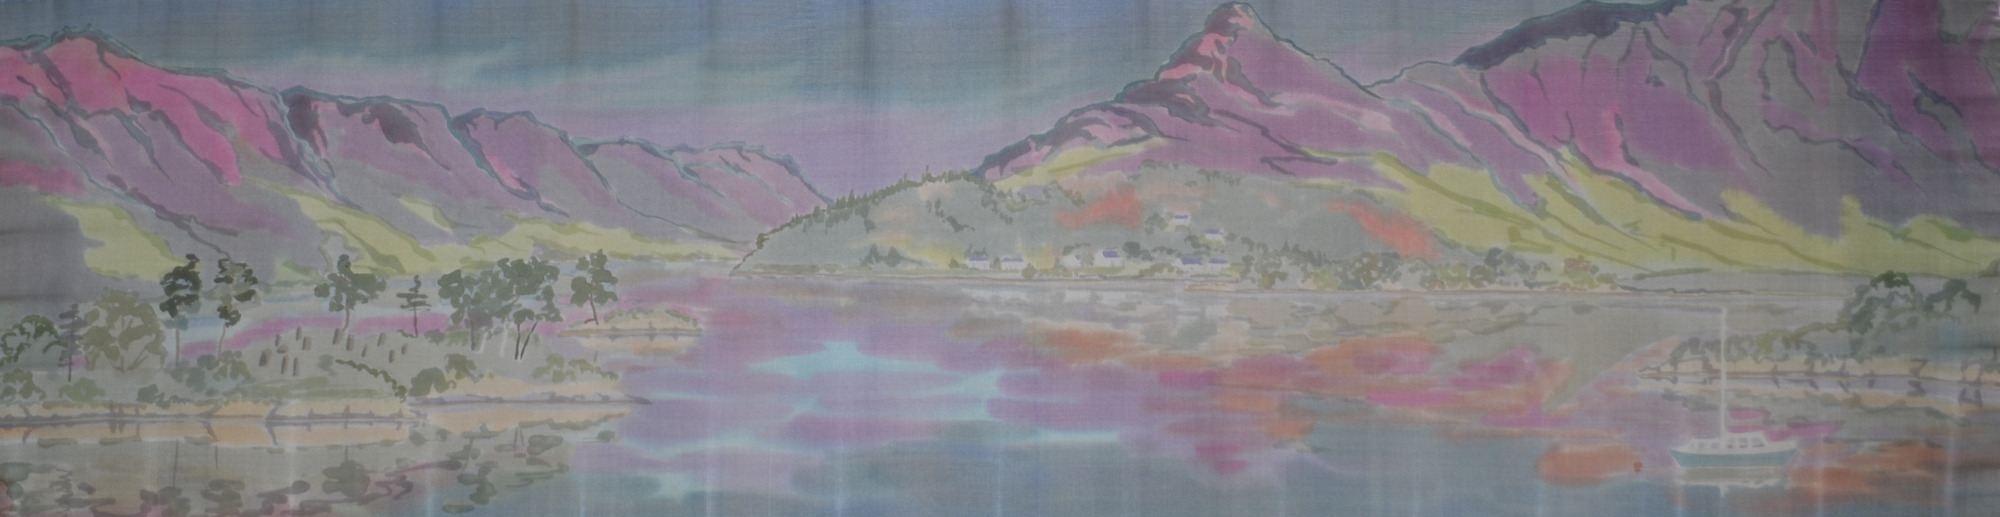 Loch Leven and the Pap of Glen Coe silk scarf by Susie Thompson